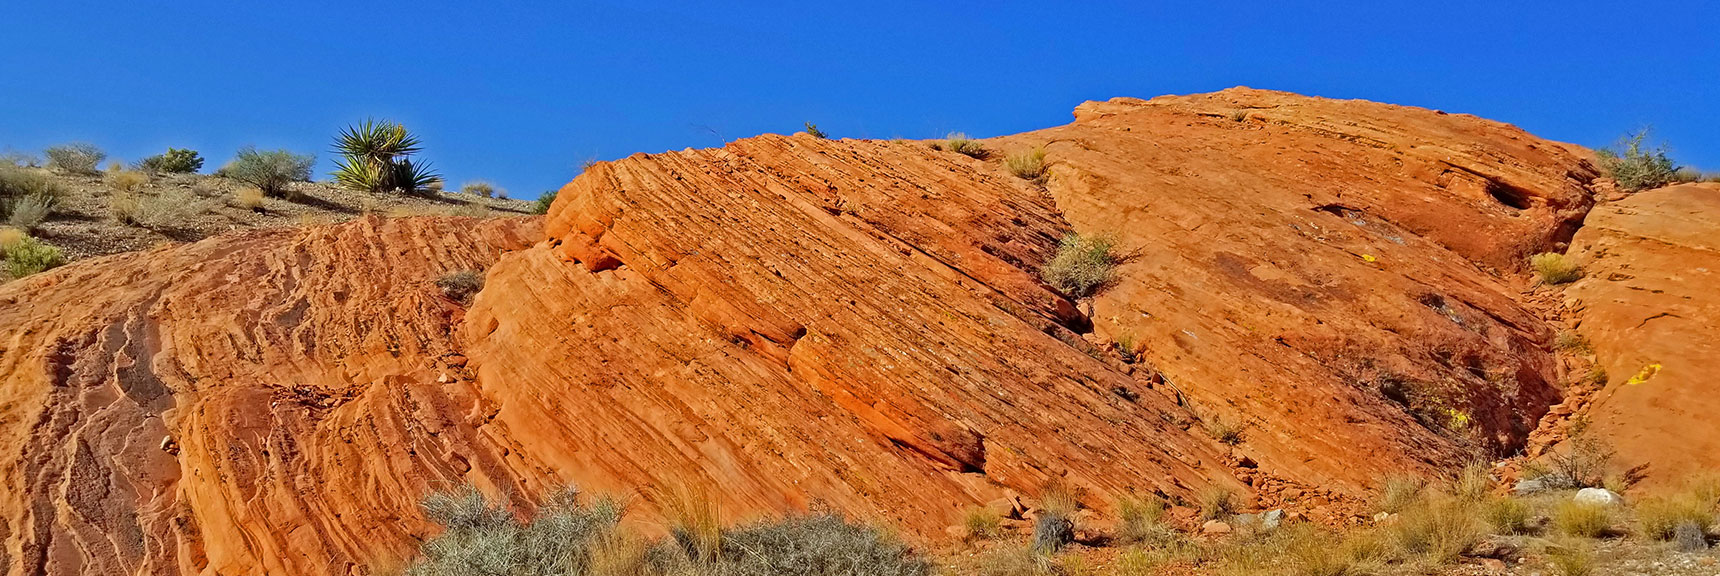 Multiple Layers Pushed Up to and Angle | Little Red Rock Las Vegas, Nevada, Near La Madre Mountains Wilderness